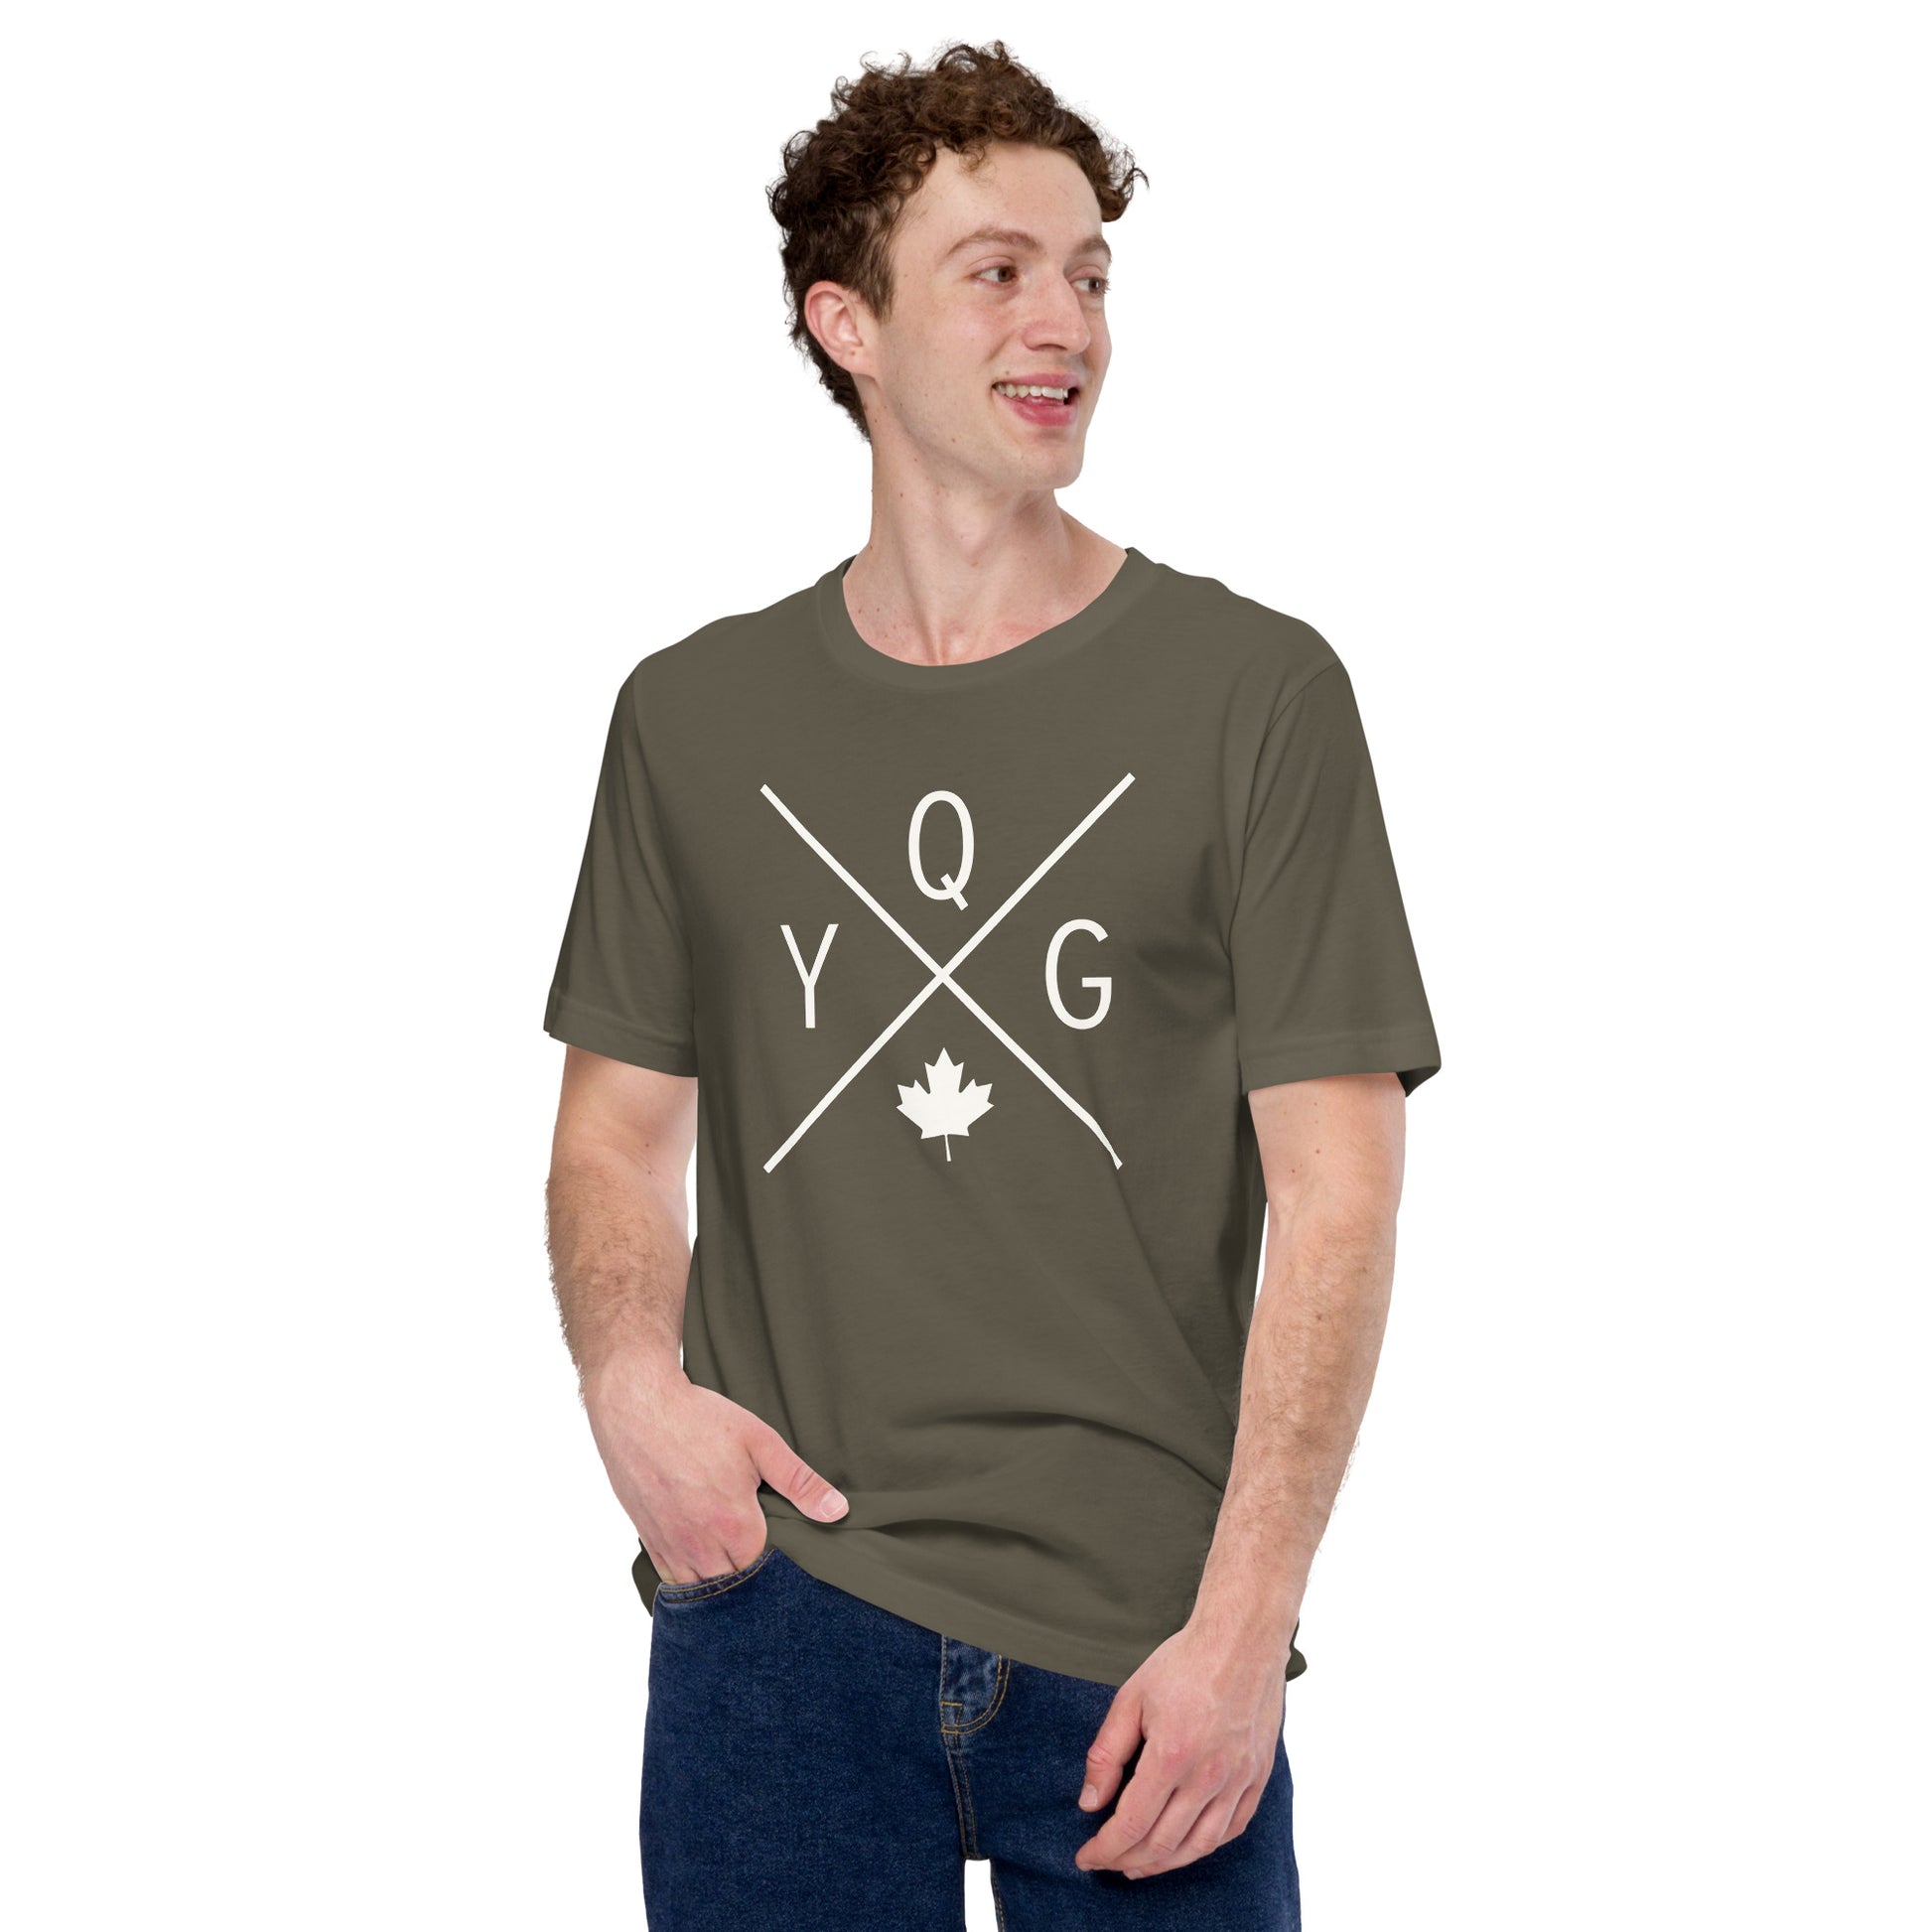 Crossed-X T-Shirt - White Graphic • YQG Windsor • YHM Designs - Image 09